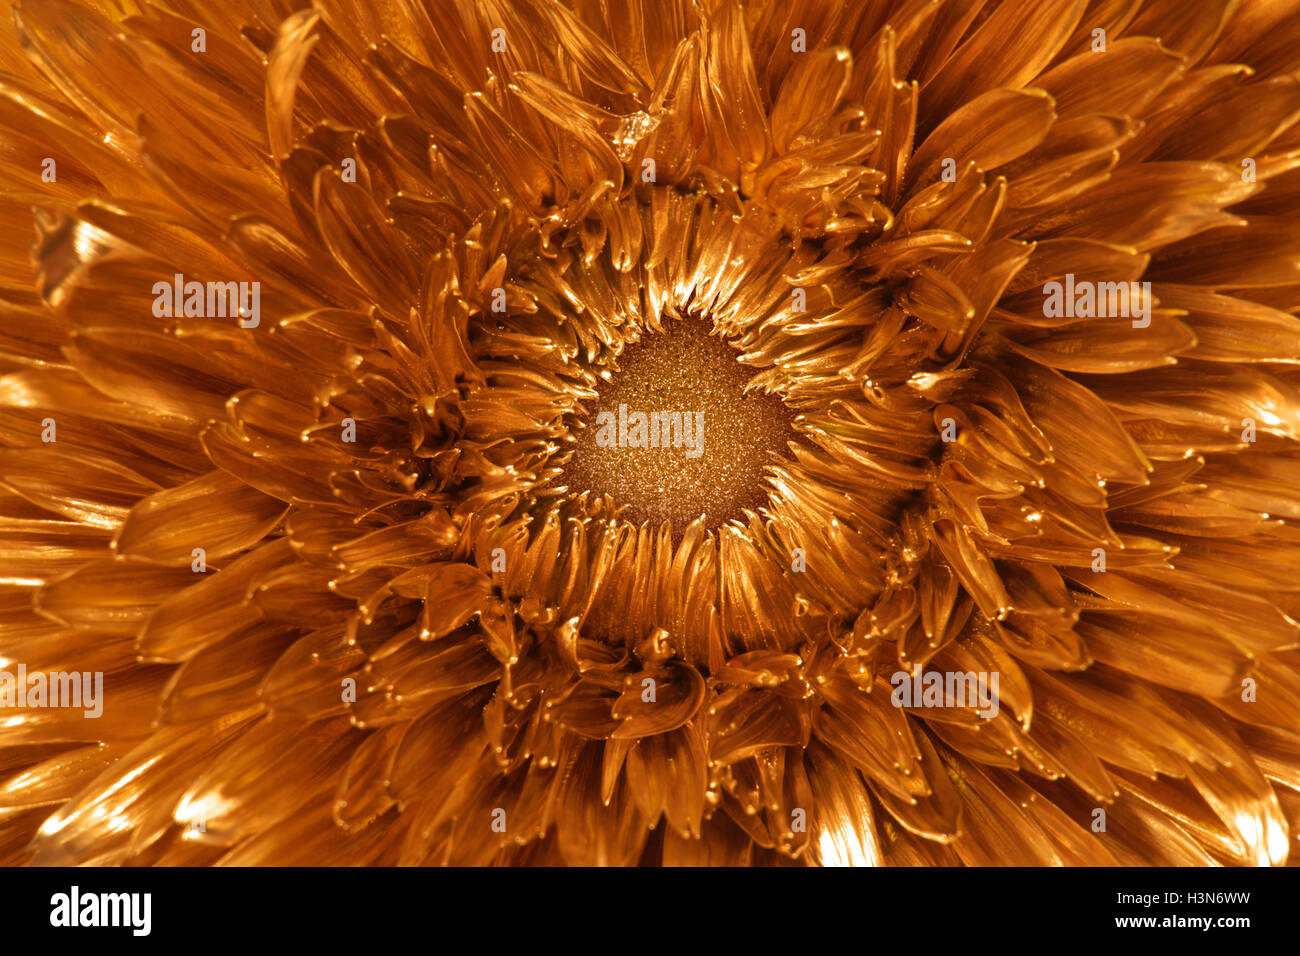 Golden chrysanthemum flower with the word Stock Photo